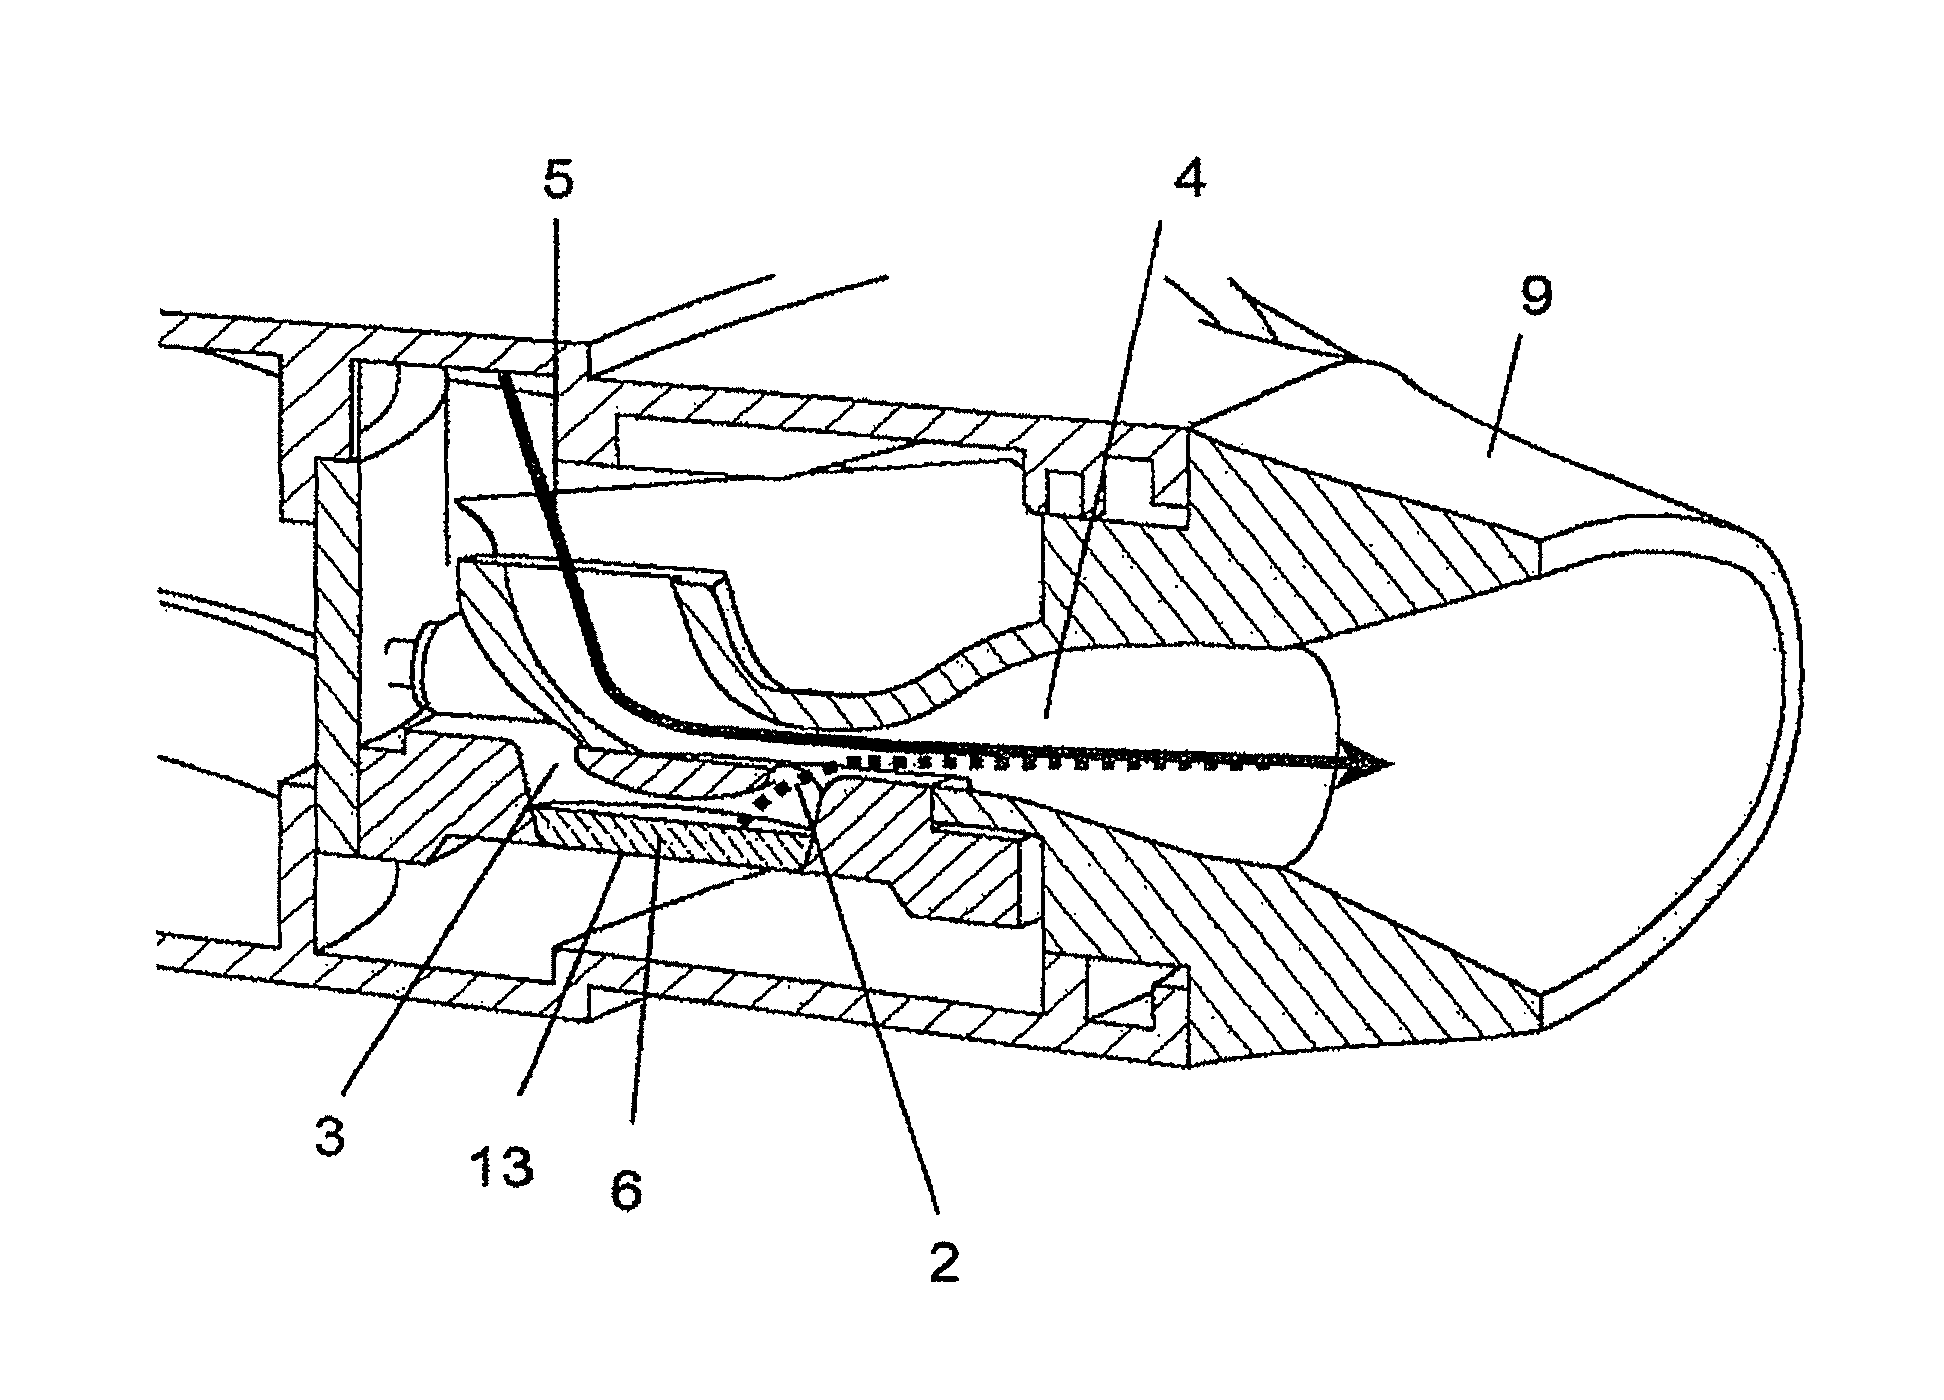 Medicament dispensing device, medicament magazine therefor and method of removing a medicament from a medicament chamber